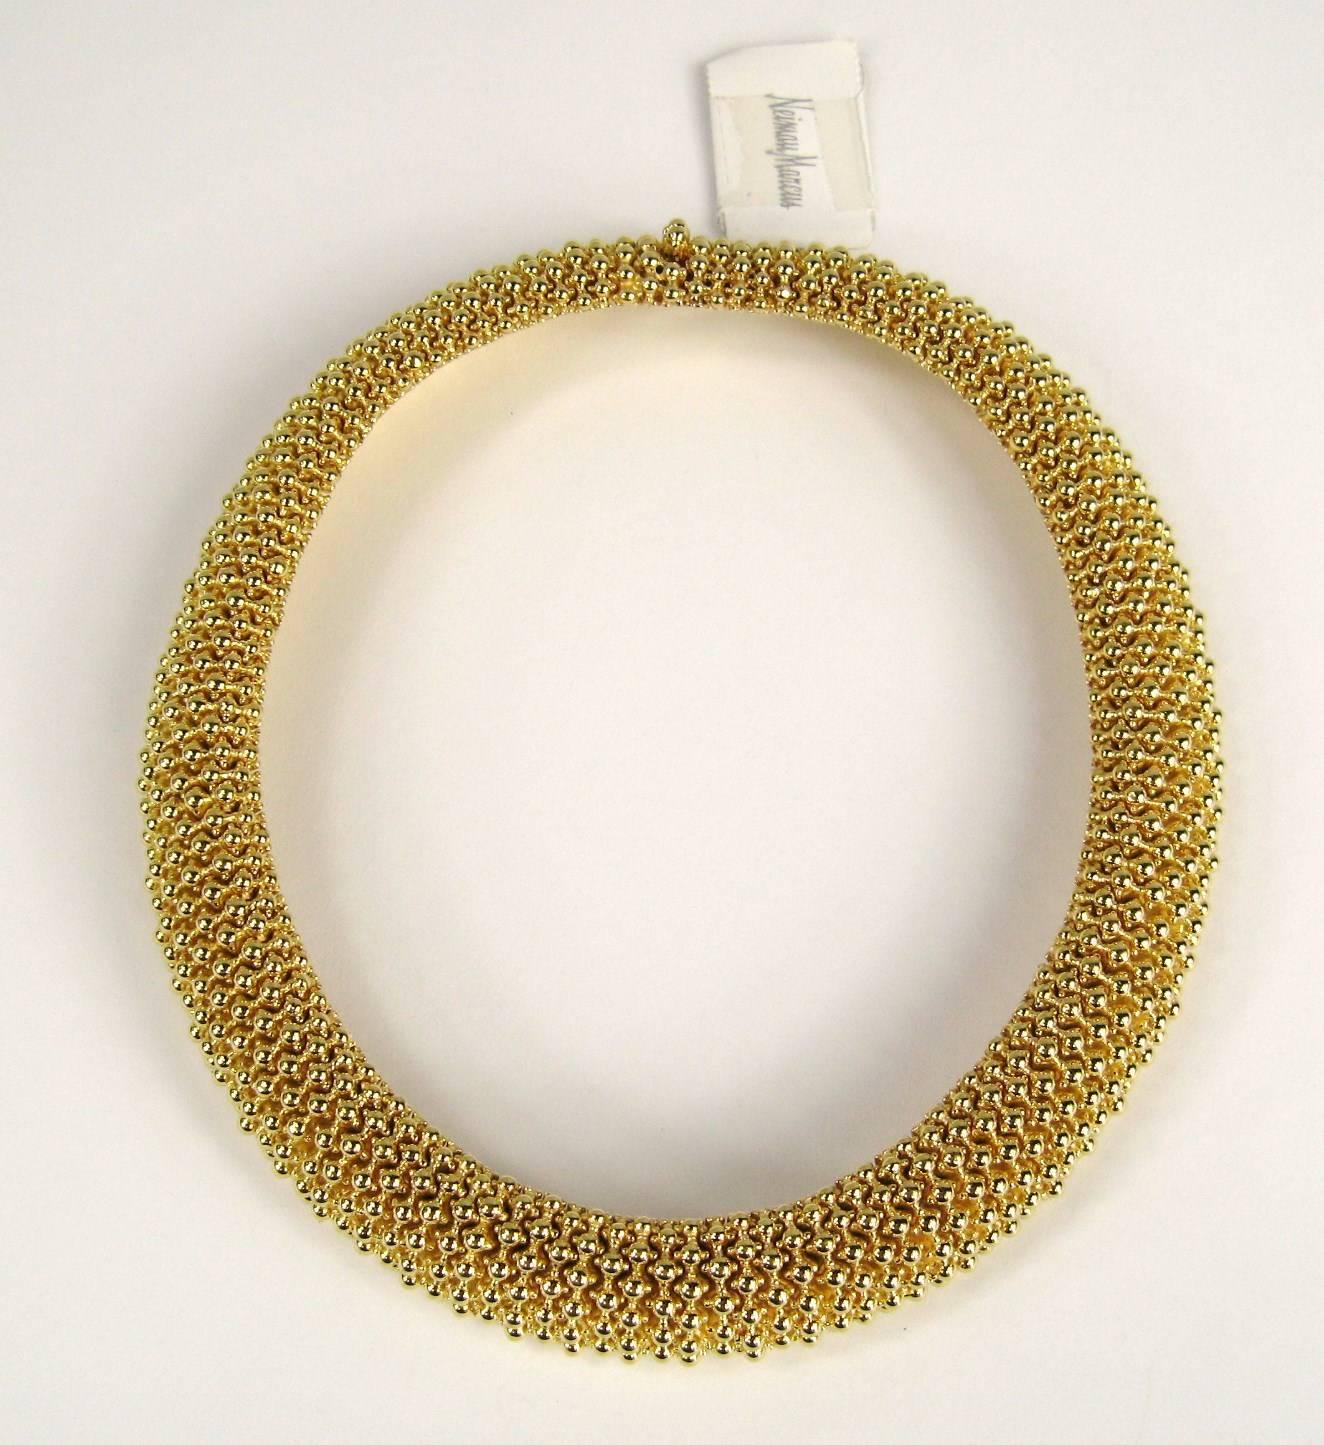 Stunning Gold tone Ciner Choker necklace, which has never been worn. 
Purchased at Neiman Marcus in the late 1980s and stored away till now. 
Matching earrings available on our storefront as well.
Measuring 
.80 wide and approximately 17